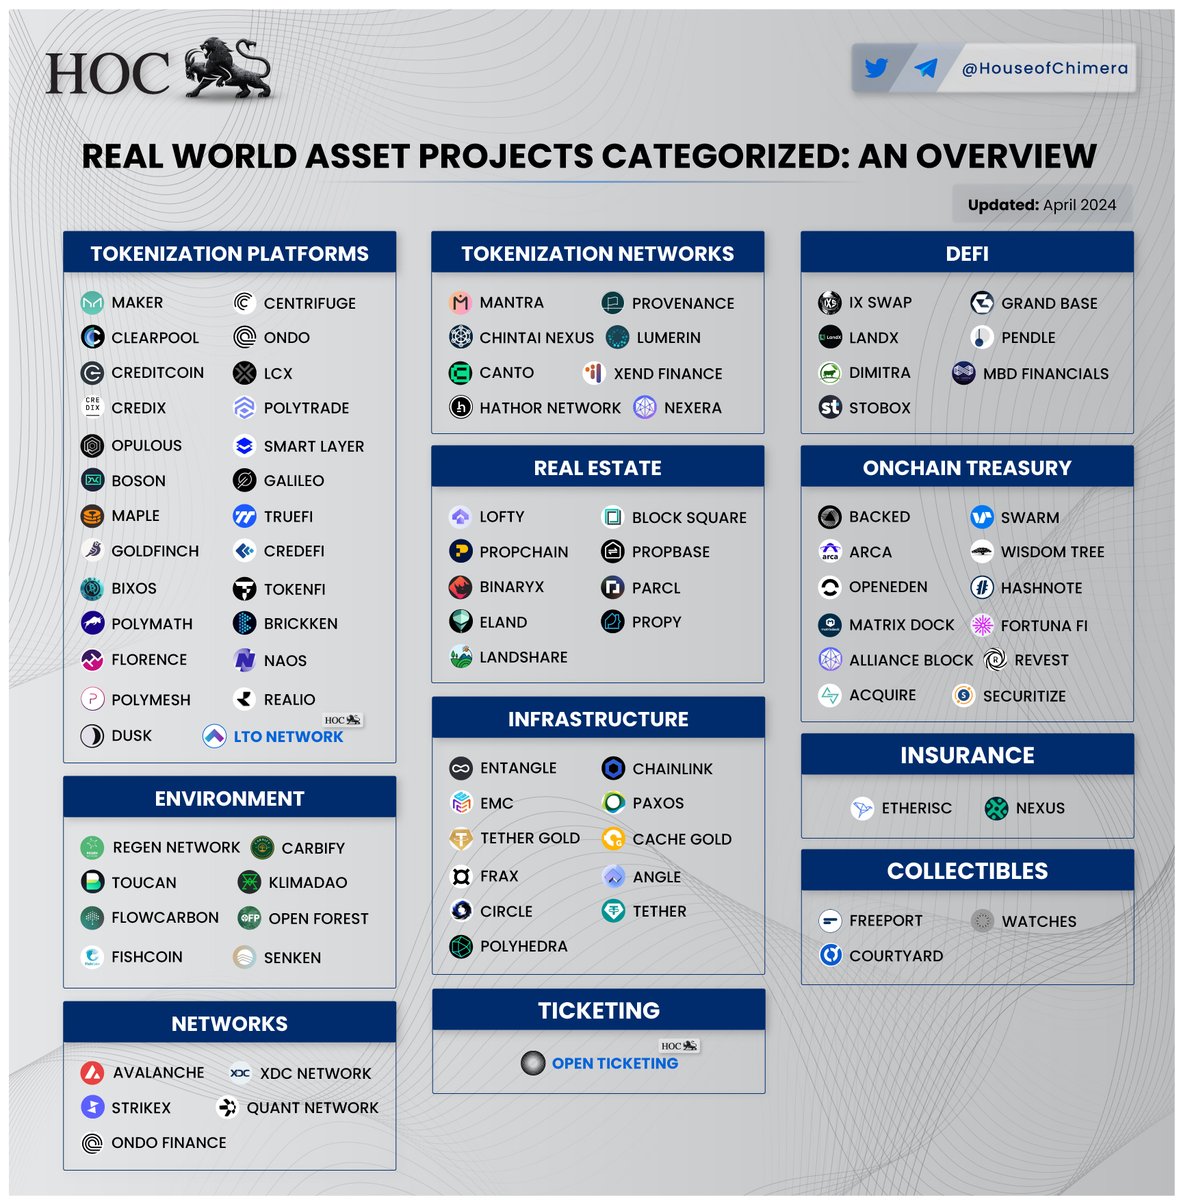 Real World Asset (RWA) Projects Categorized: An Overview 
🔹The RWA industry is flourishing, with more and more traditional financial institutions (e.g. Blackrock, Citibank) experimenting with tokenization of assets
🔸The Web3 industry has an incredible set of innovative projects…